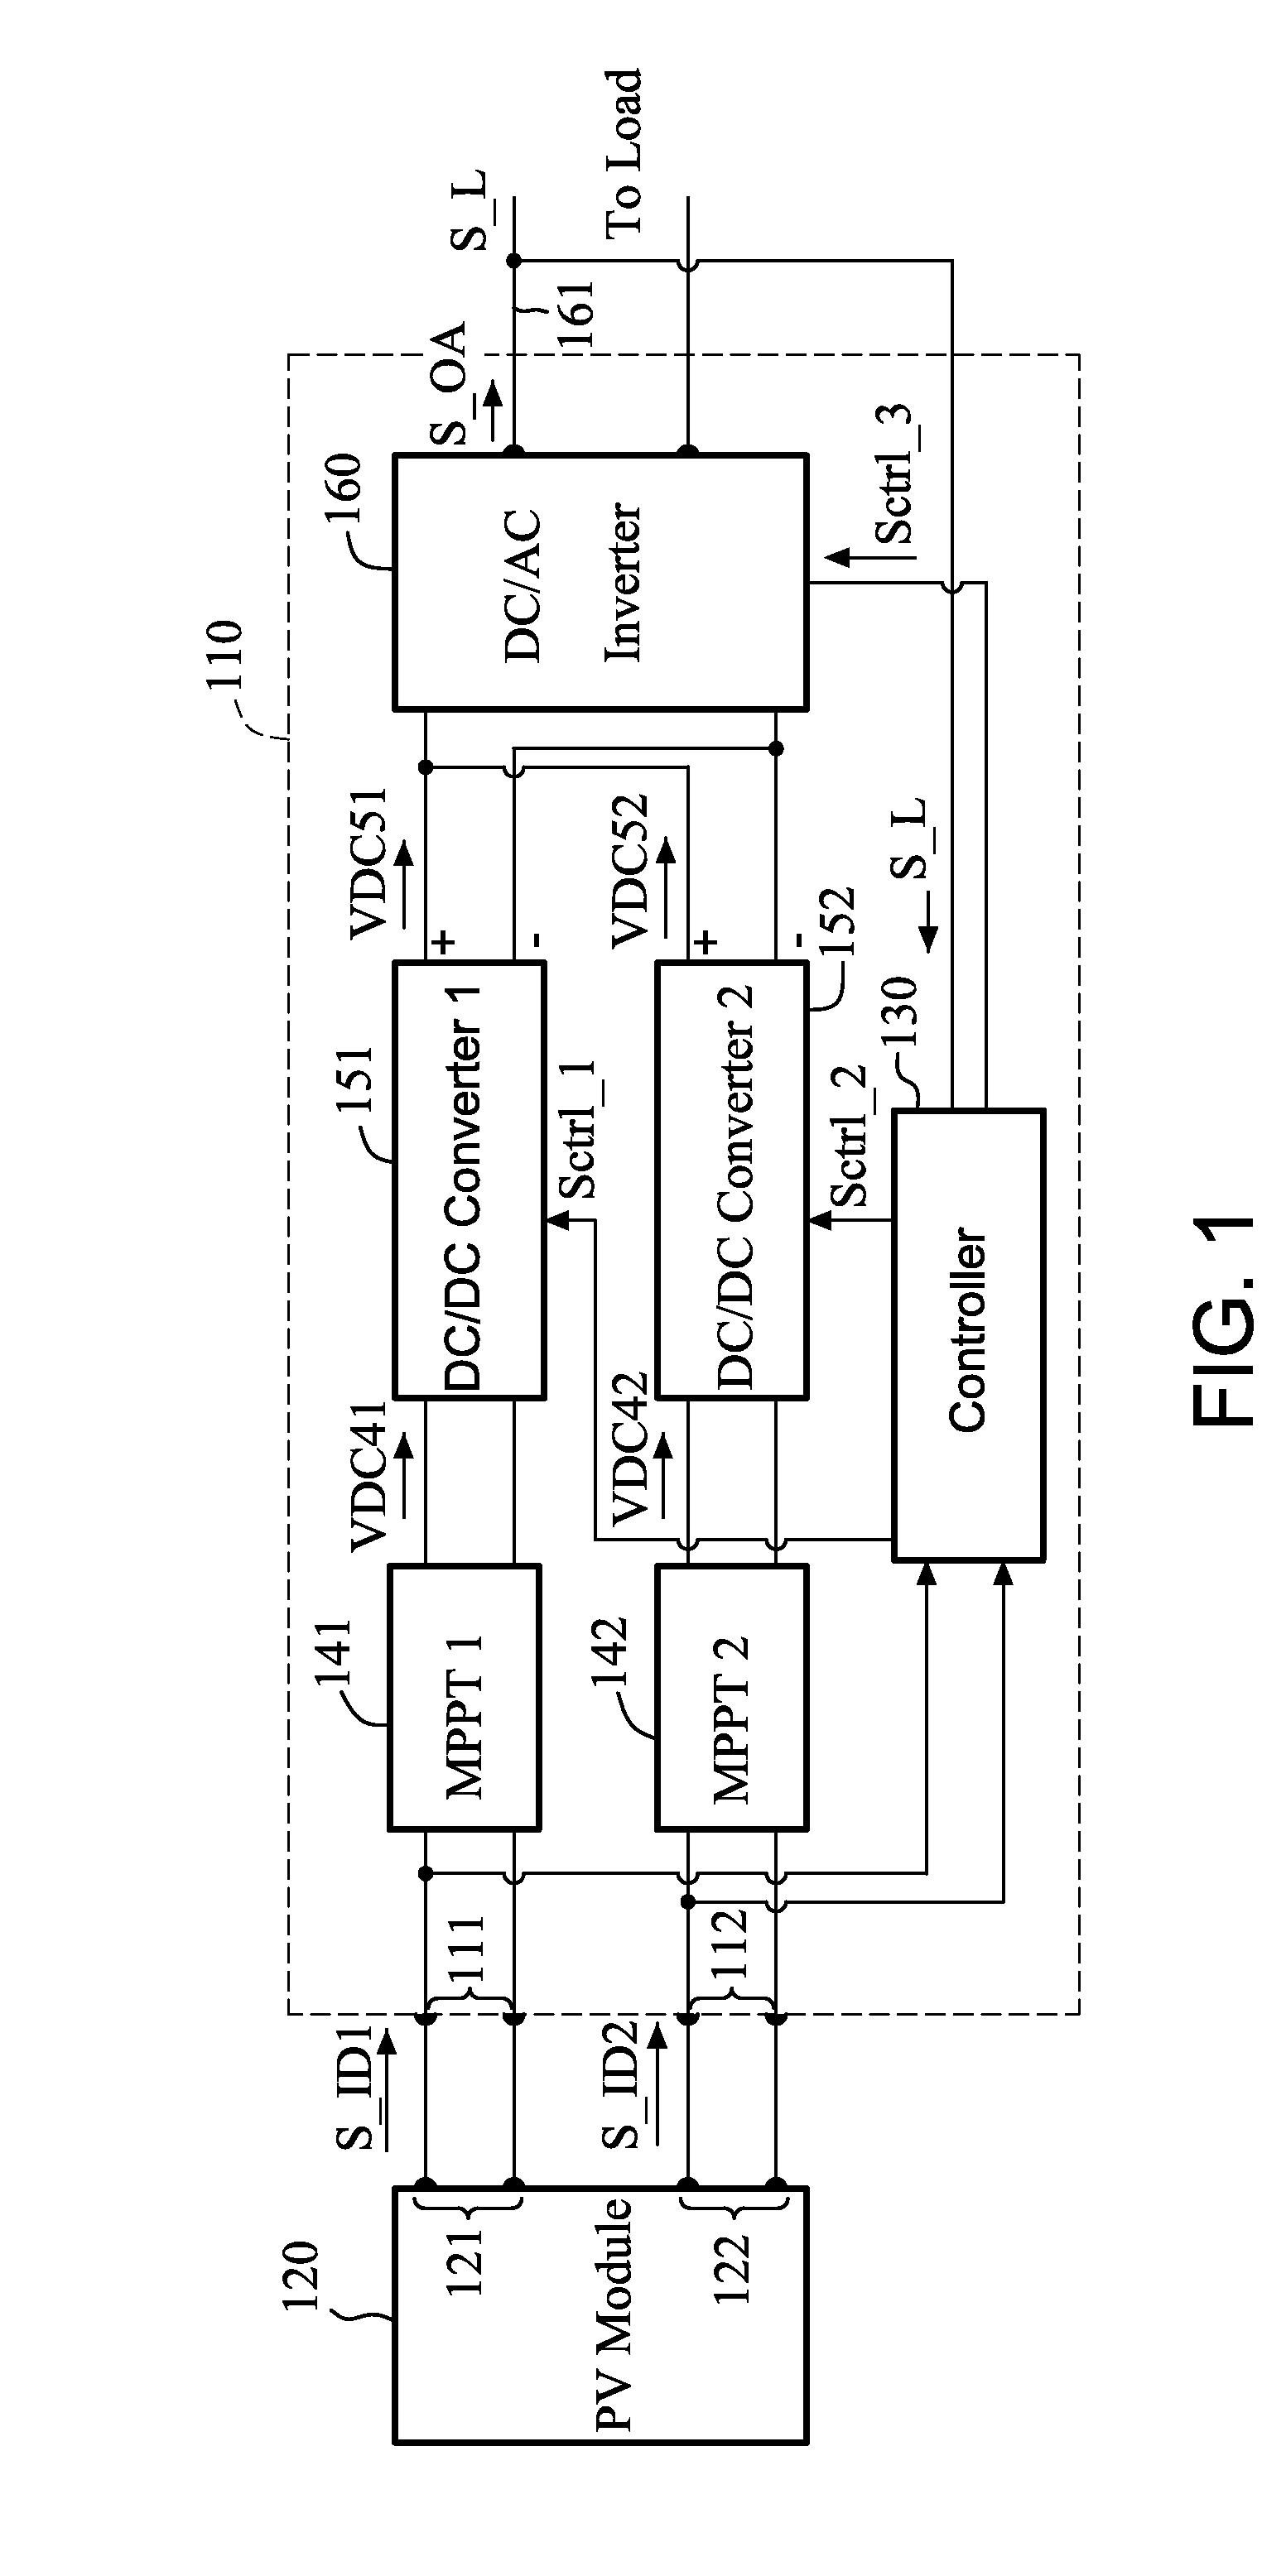 Converting device with multiple input terminals and two output terminals and photovoltaic system employing the same